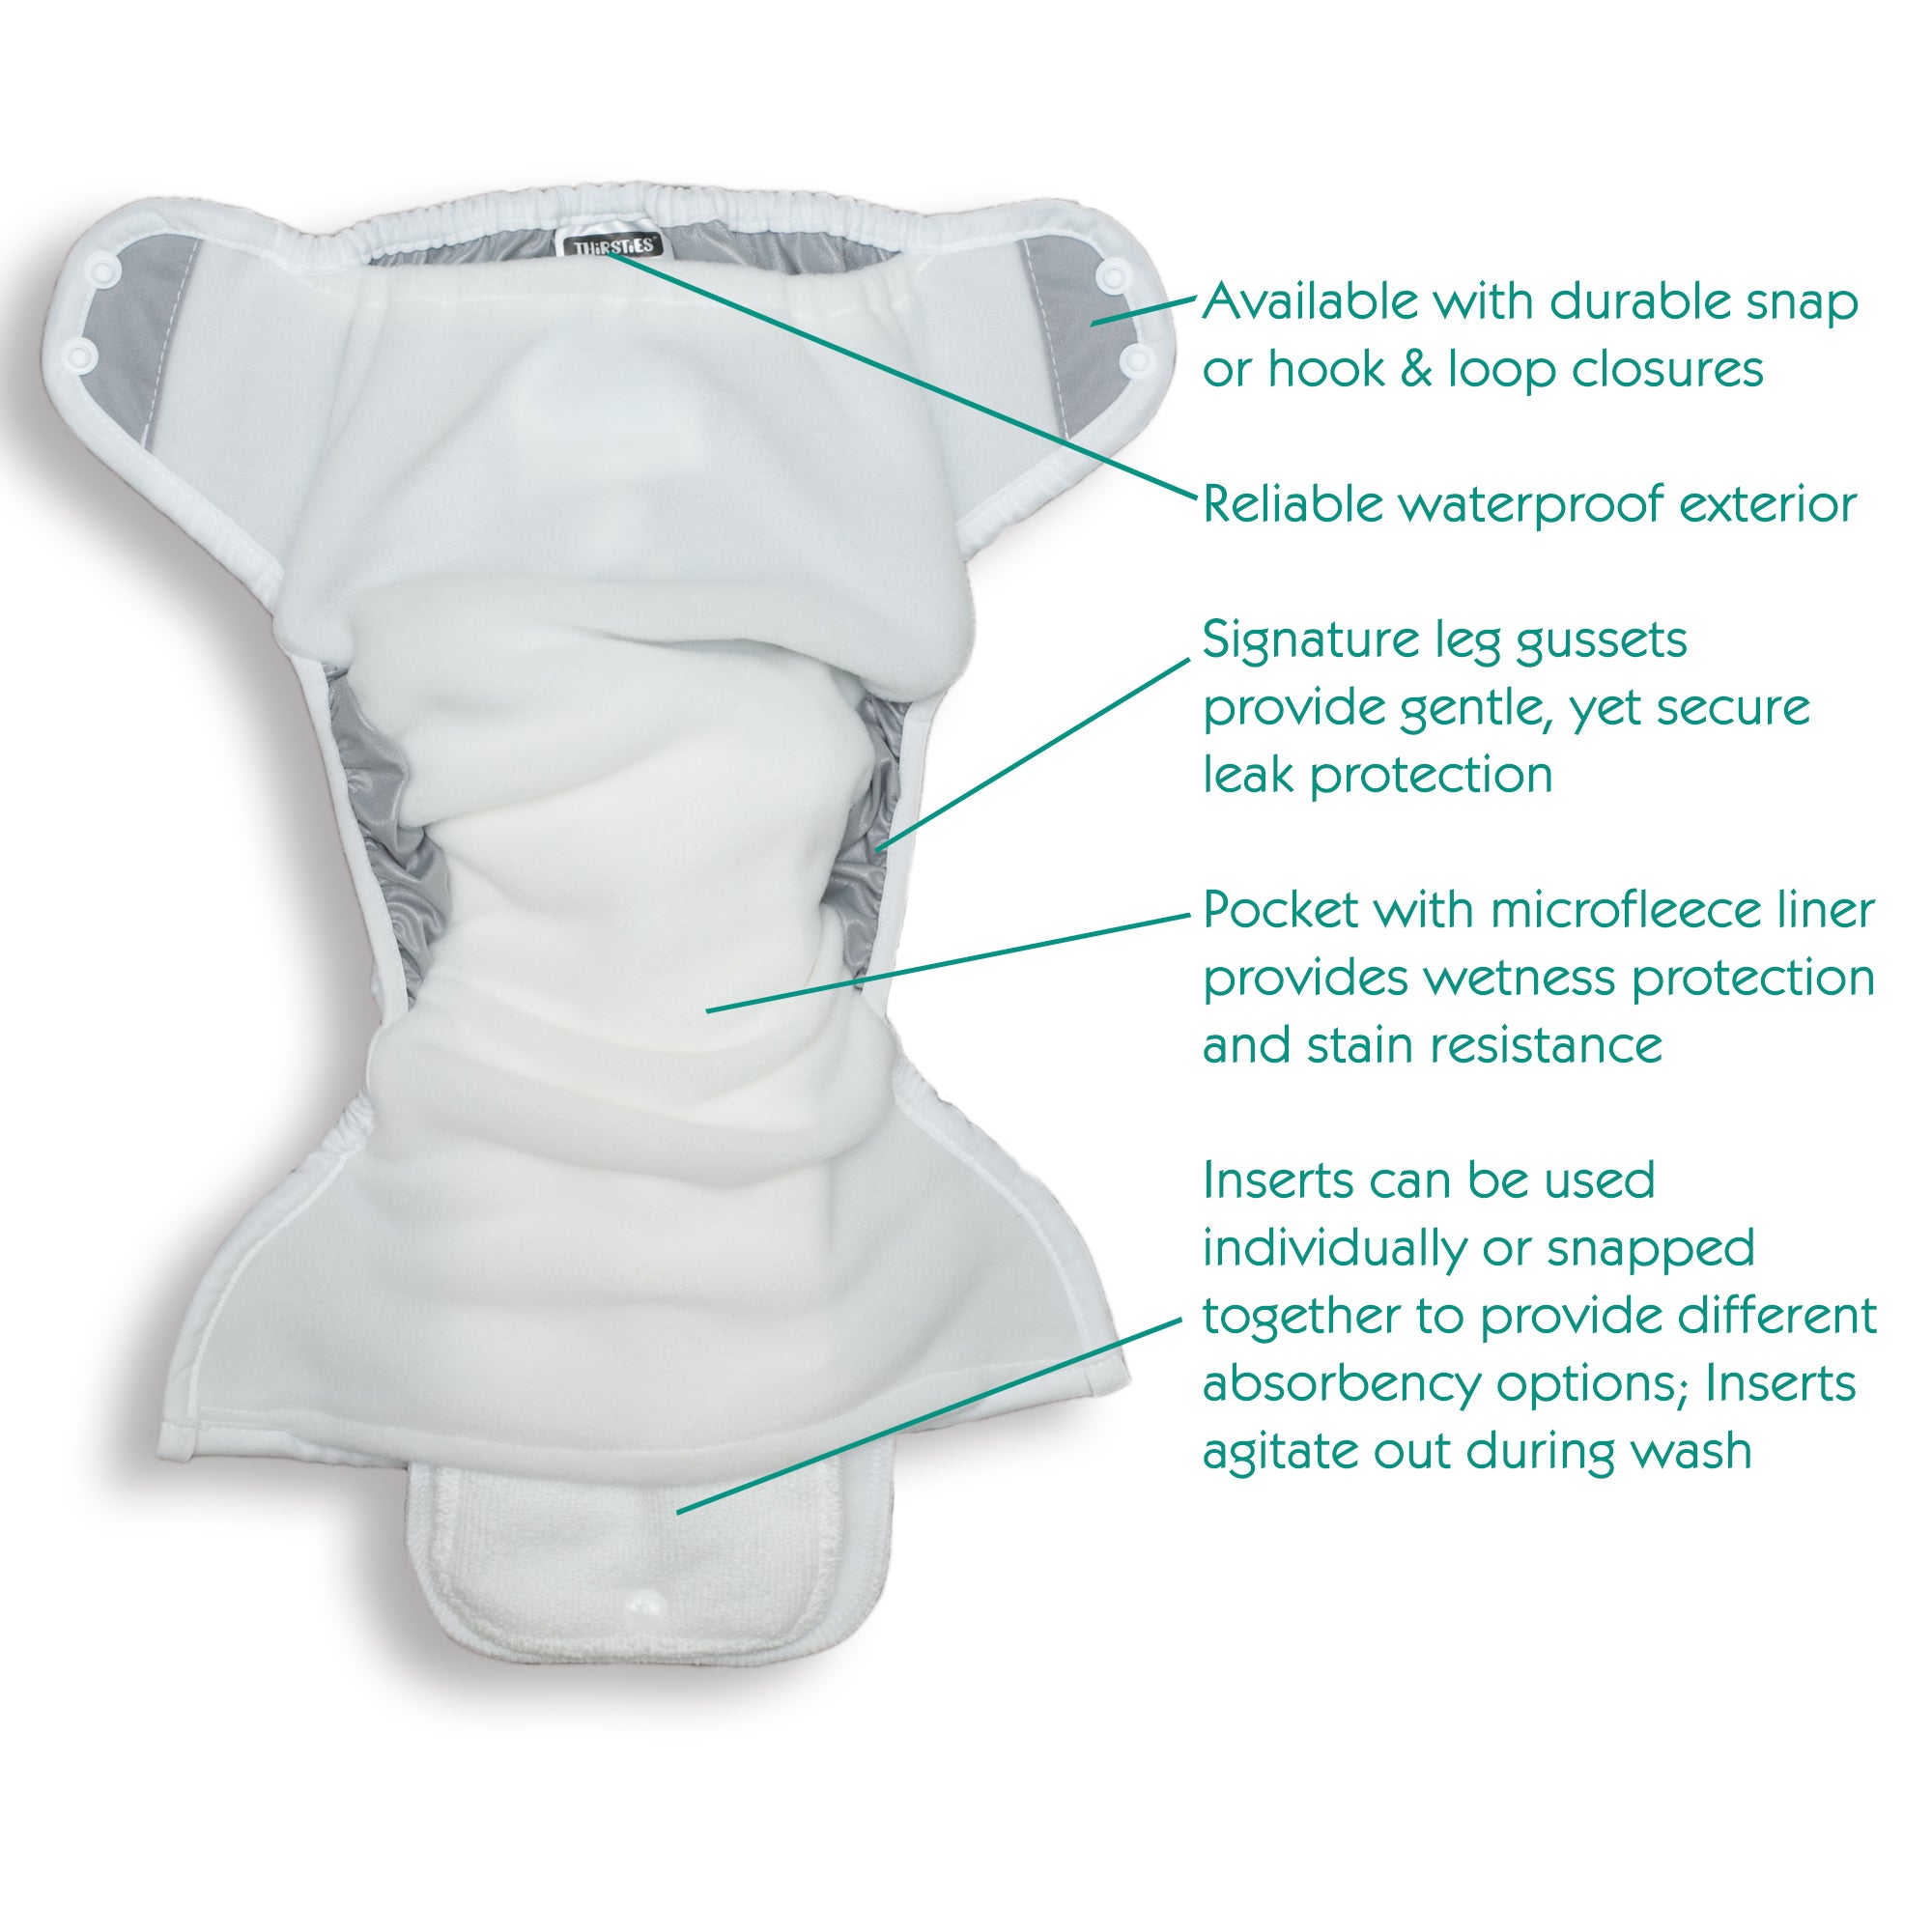 -Image of Thirsties One Size Pocket diaper graphic. Arrow pointing to each part of the diaper indicating: Available with durable snap or hook & loop closures; Reliable waterproof exterior; Signature leg gussets provide gentle, yet secure leak protection; Pocket with microfleece liner provides wetness protection and stain resistance; Inserts can be used individually or snapped together to provide different absorbency options; Inserts agitate out during wash